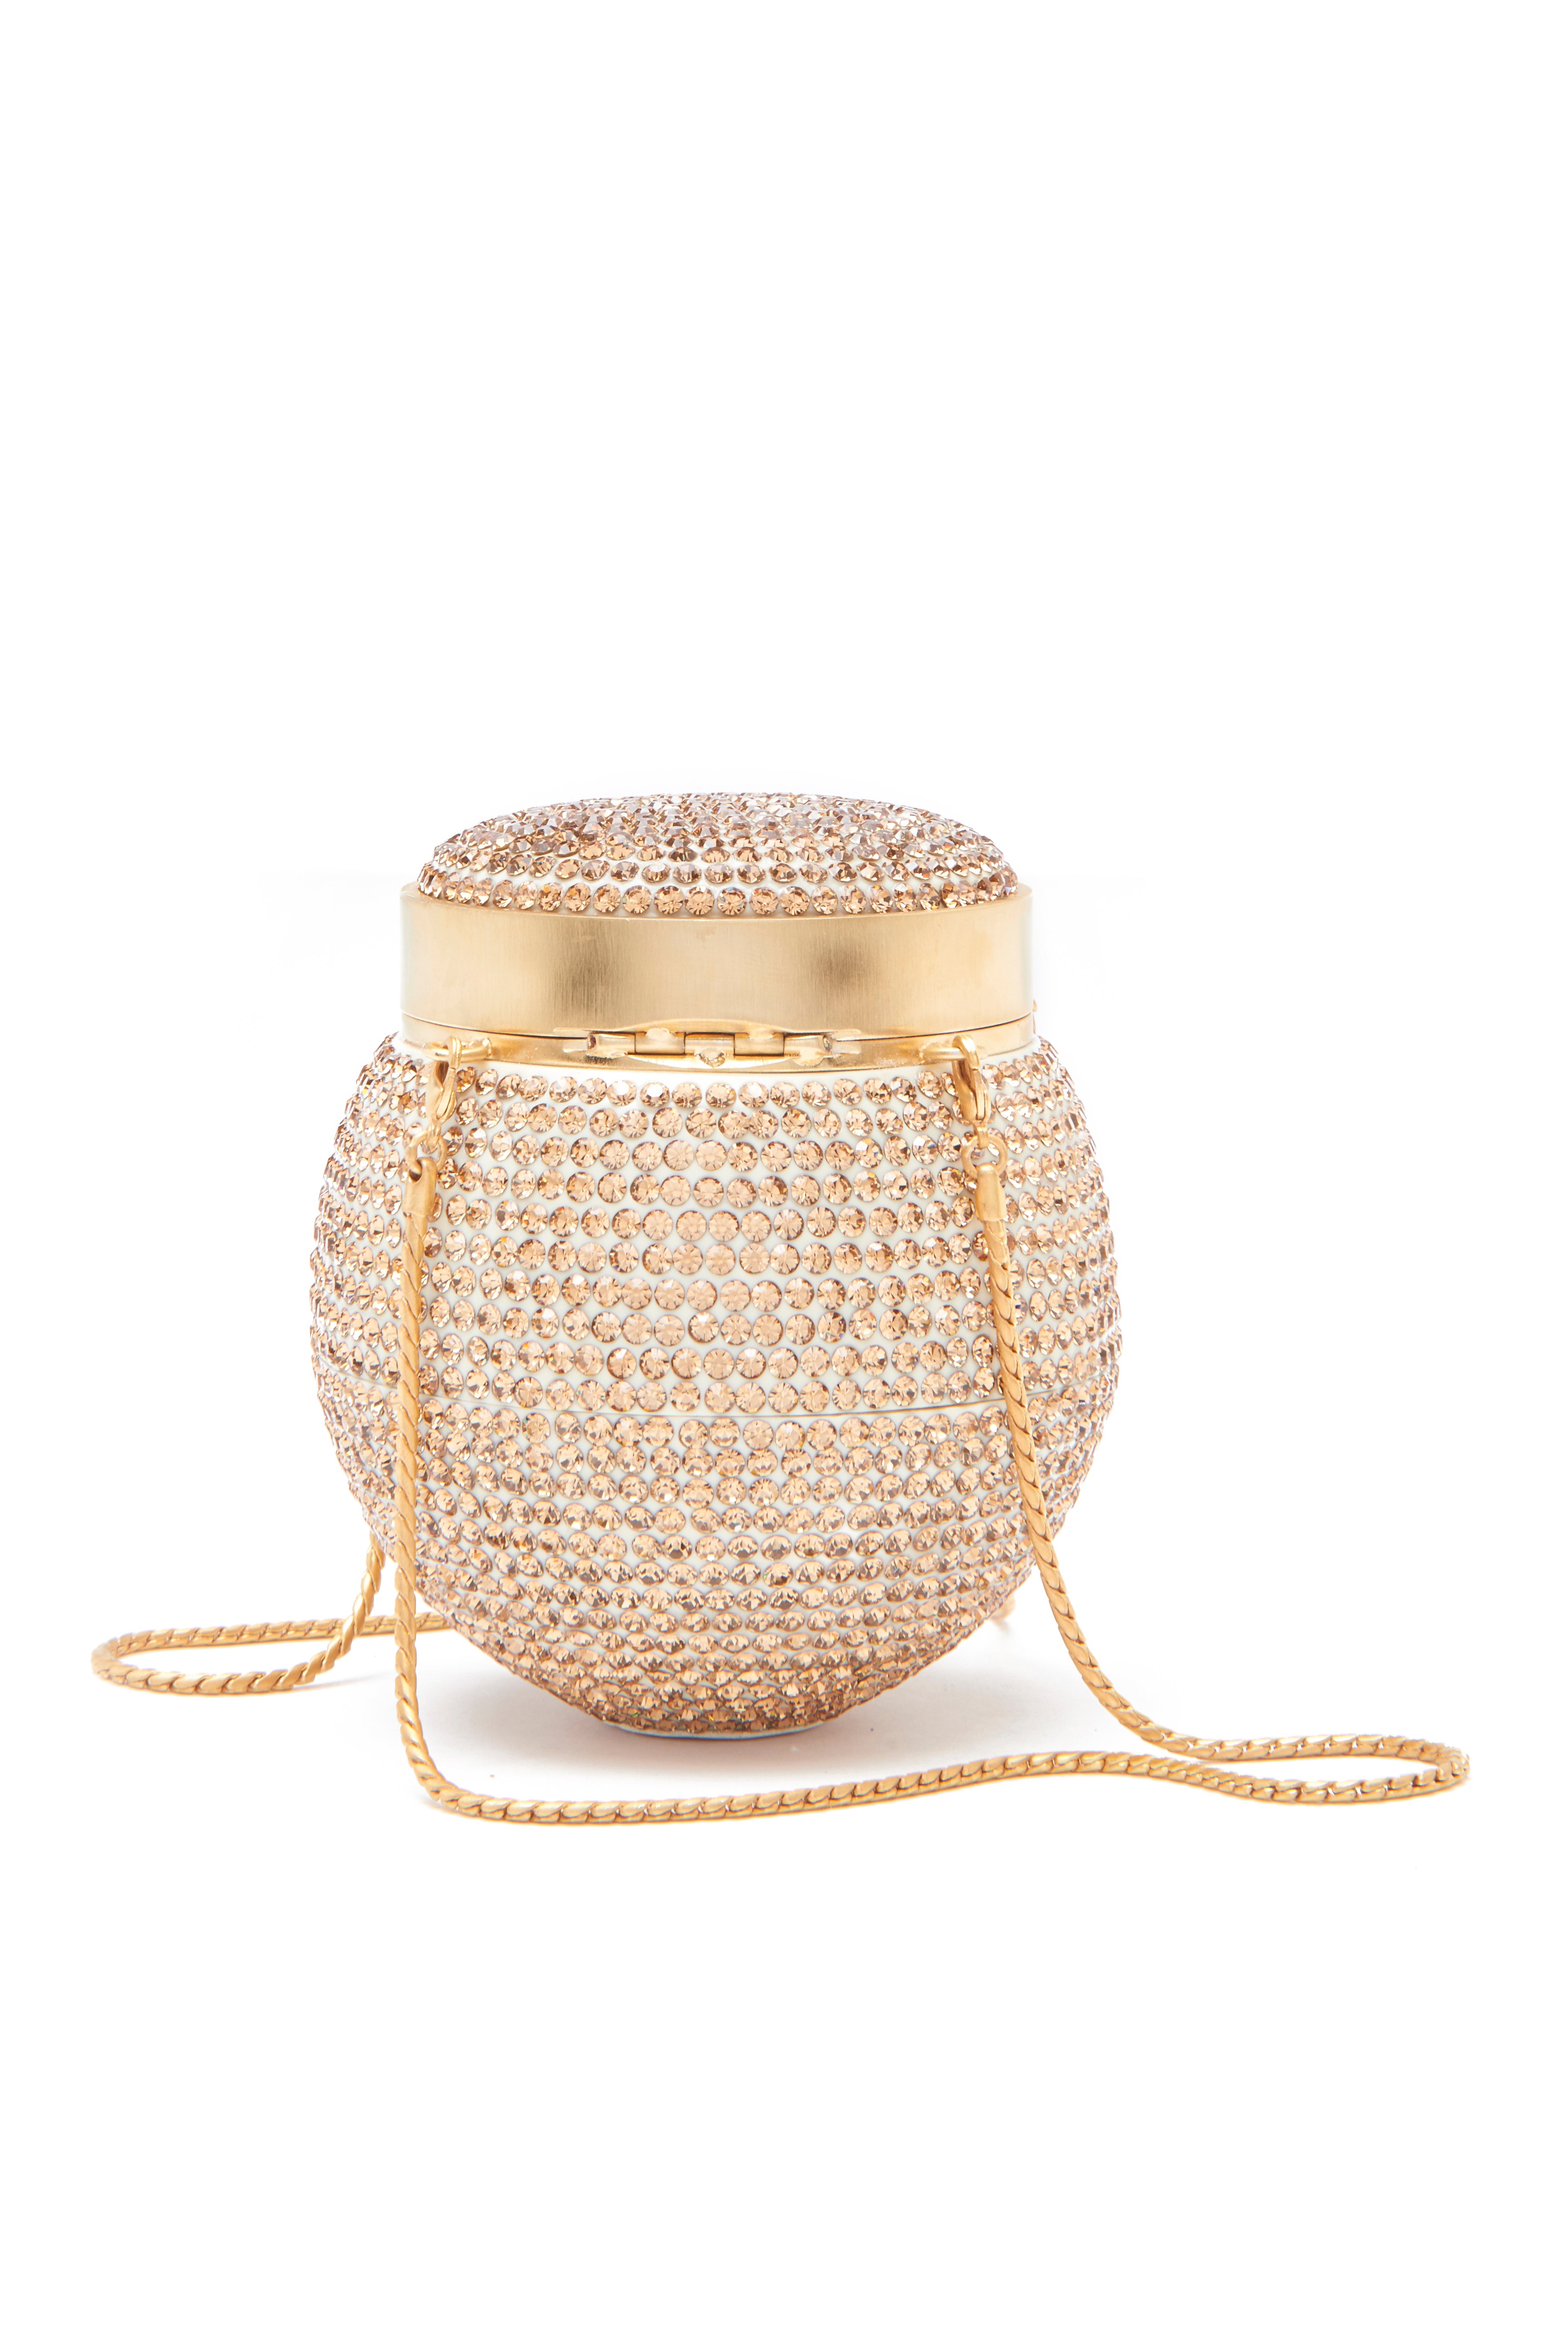 May White and Gold Crystal Round Clutch